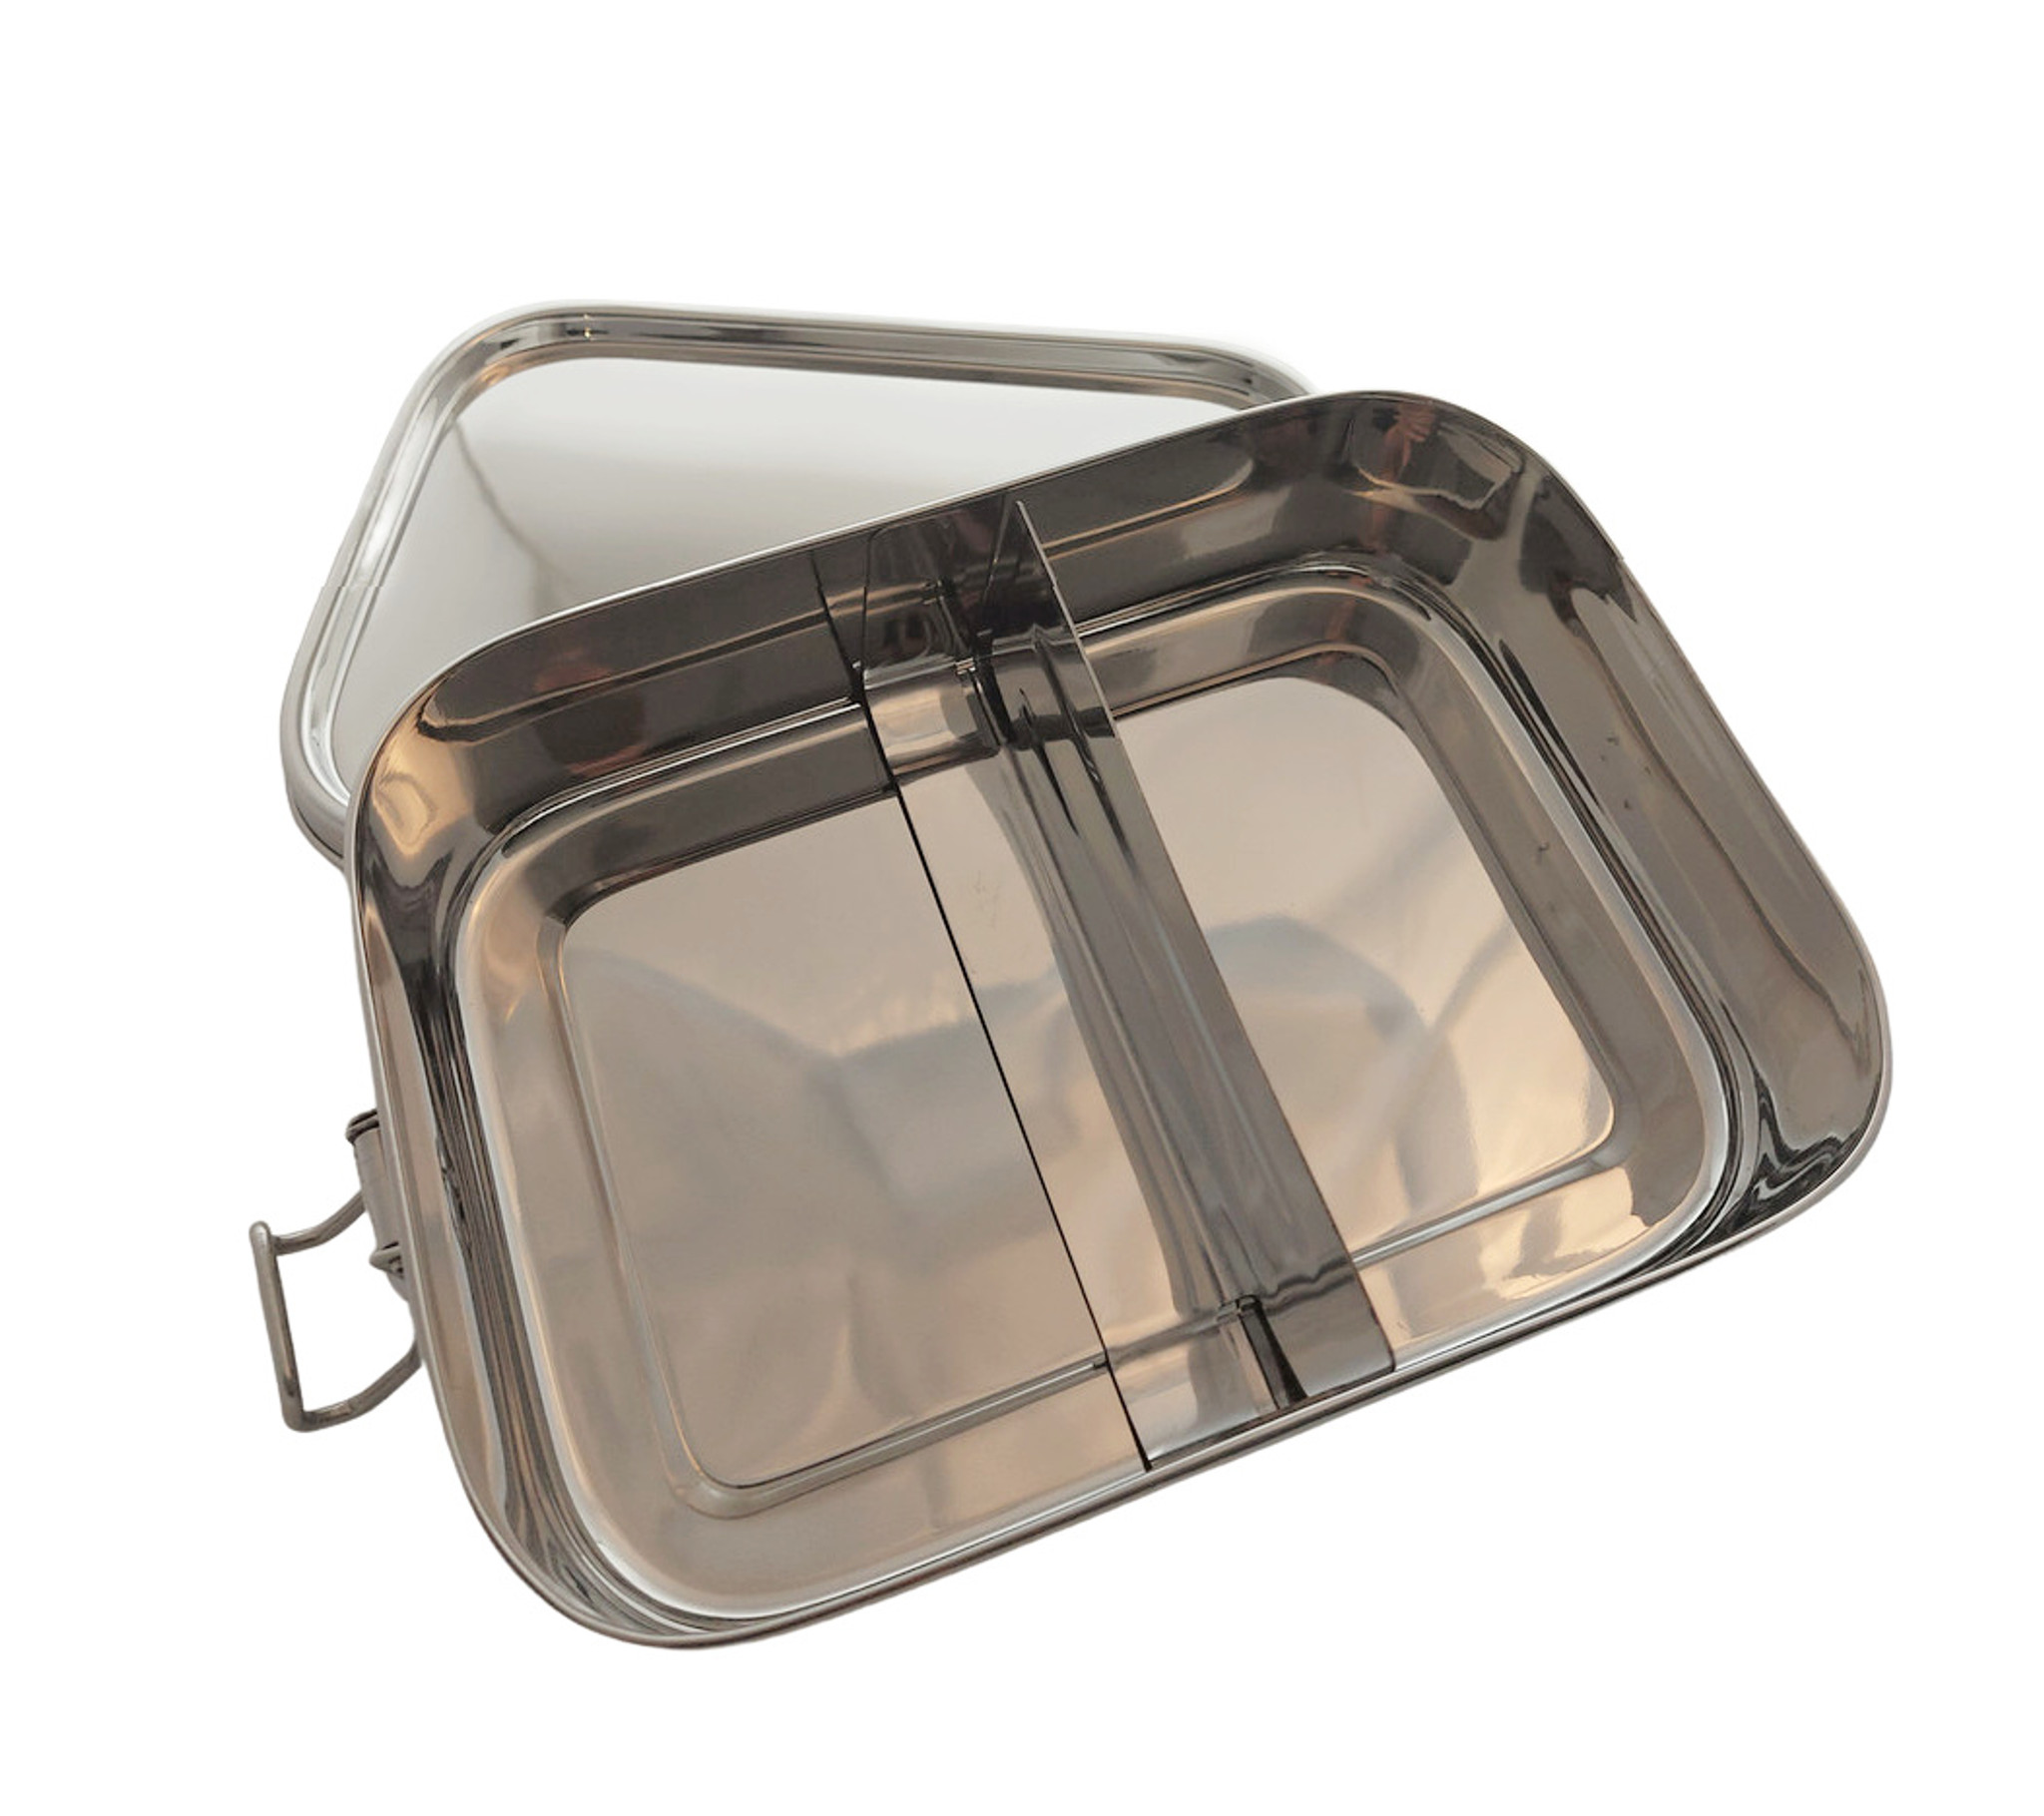 Life Without Plastic Stainless Steel Rectangular Food Storage Container with Seal - 1600 ml / 54 oz